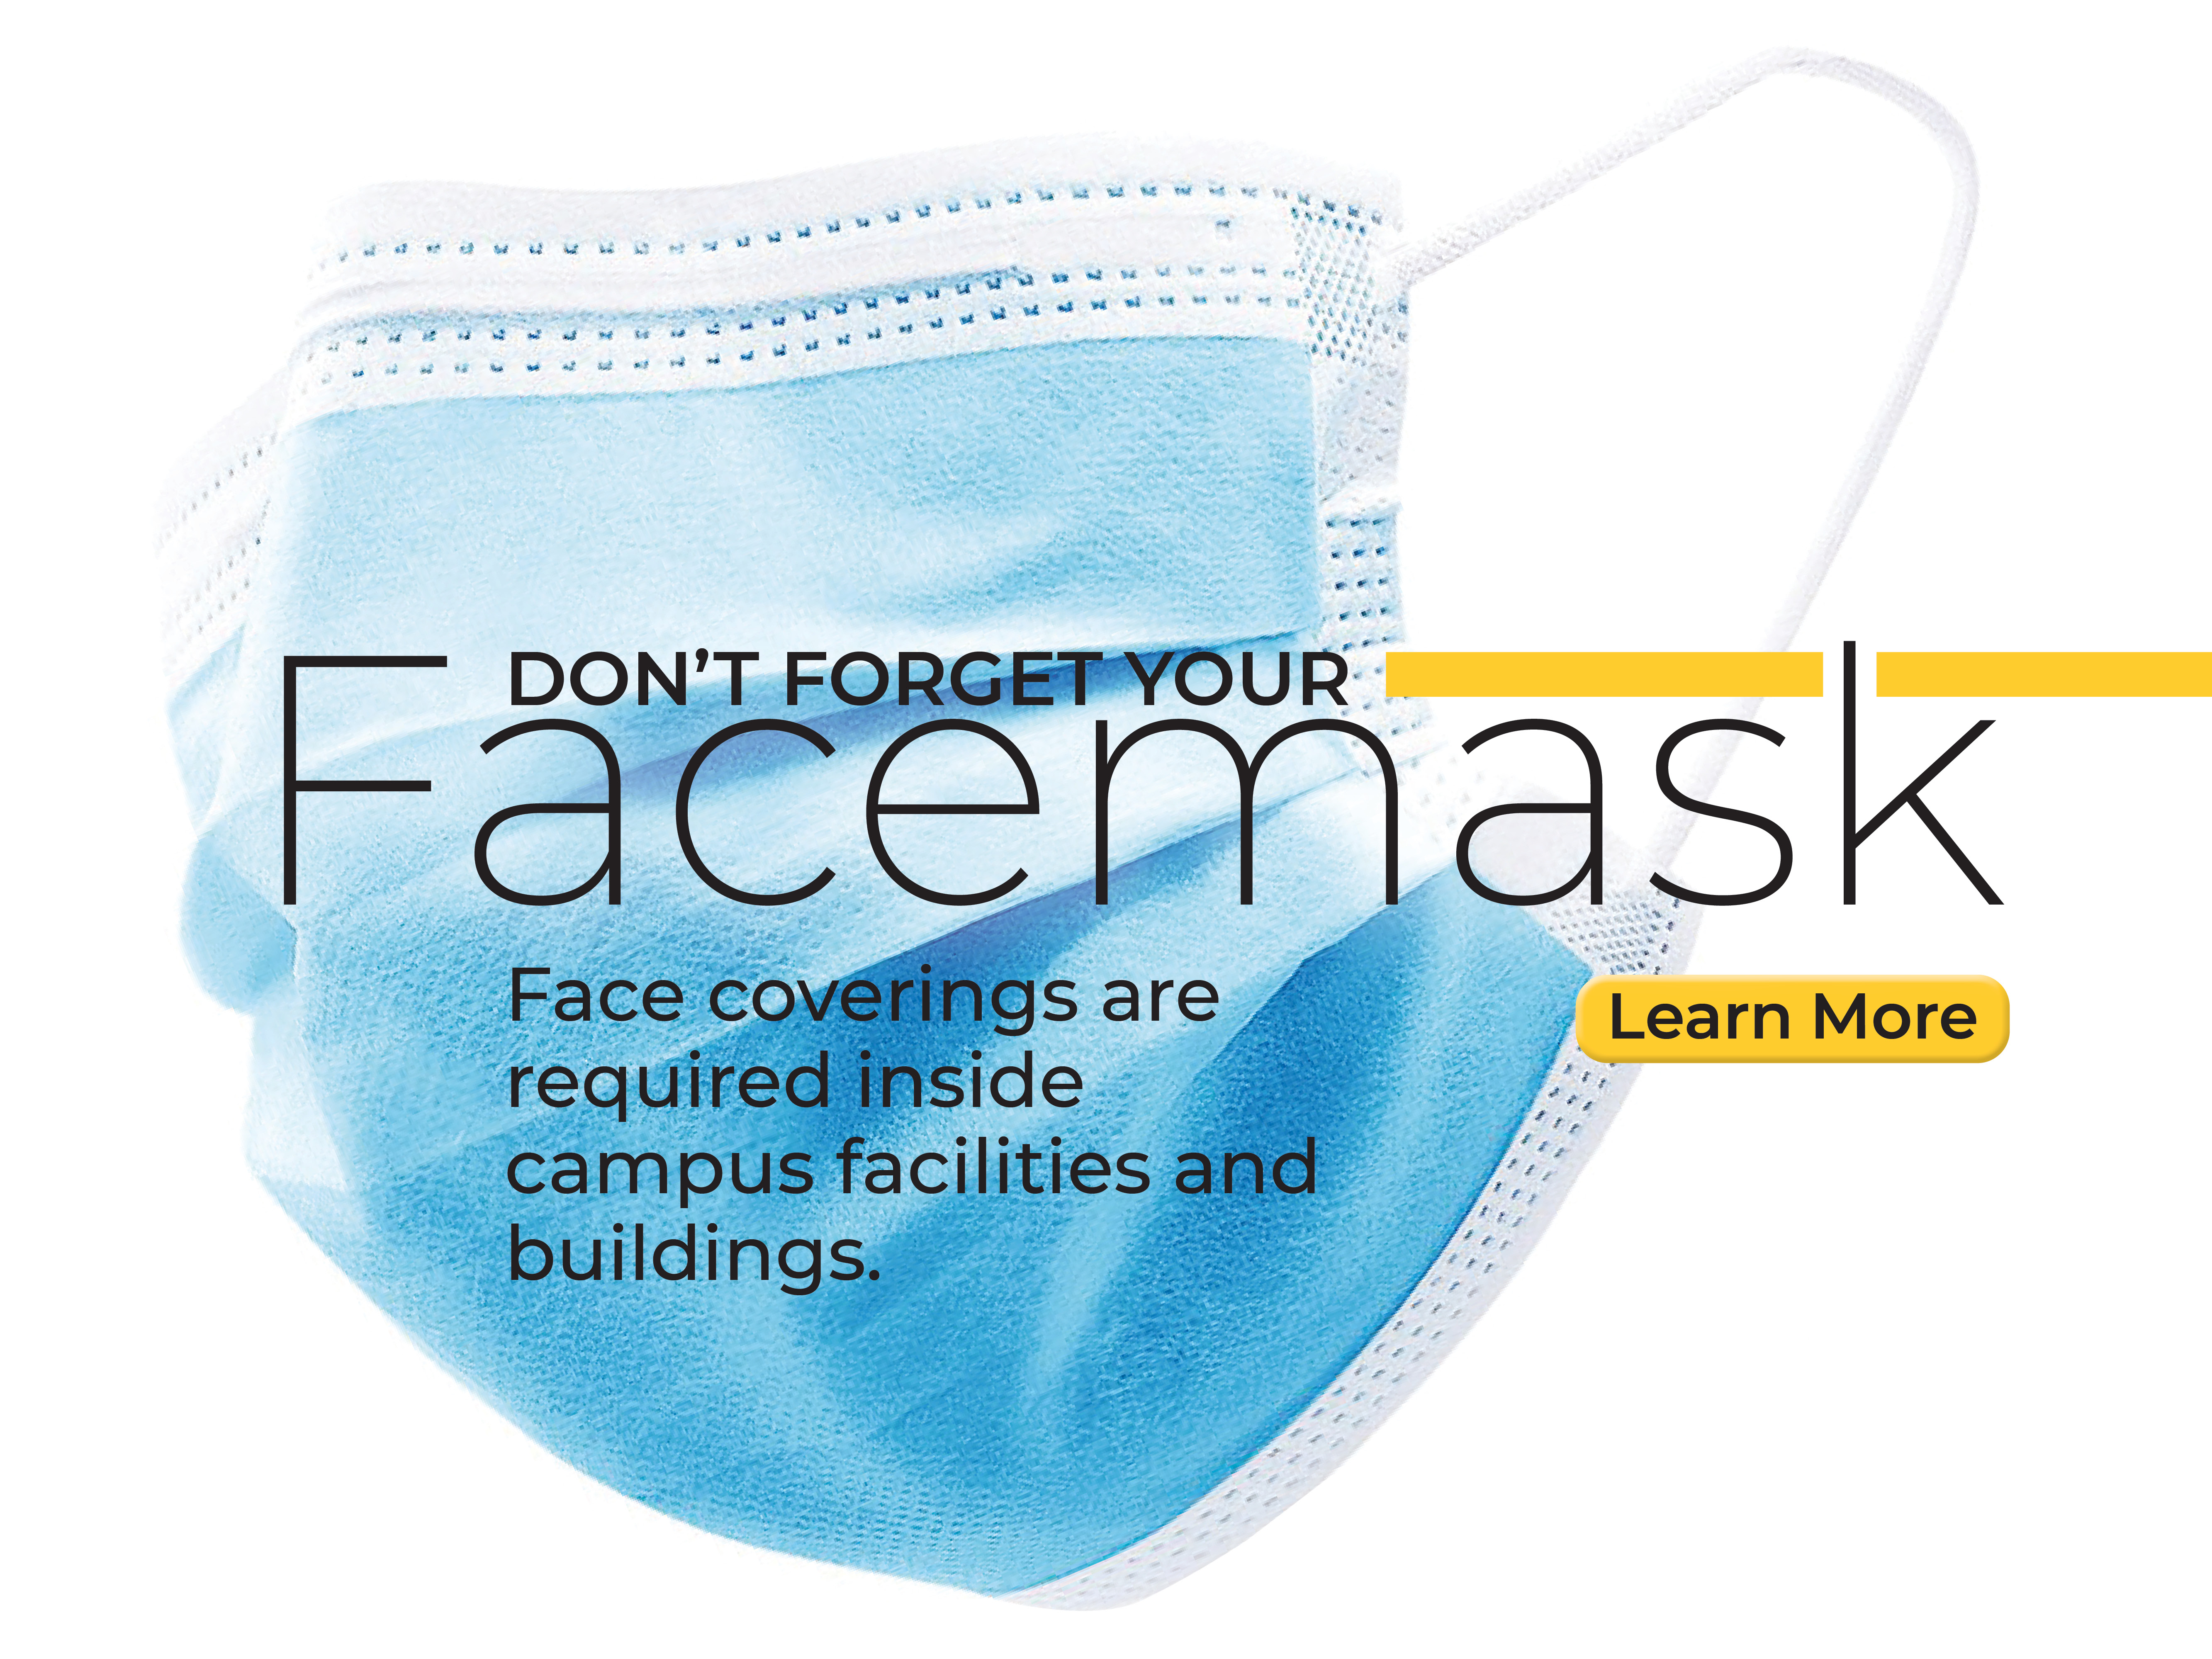 Don't forget your facemask-face coverings are required inside campus facilities and buildings